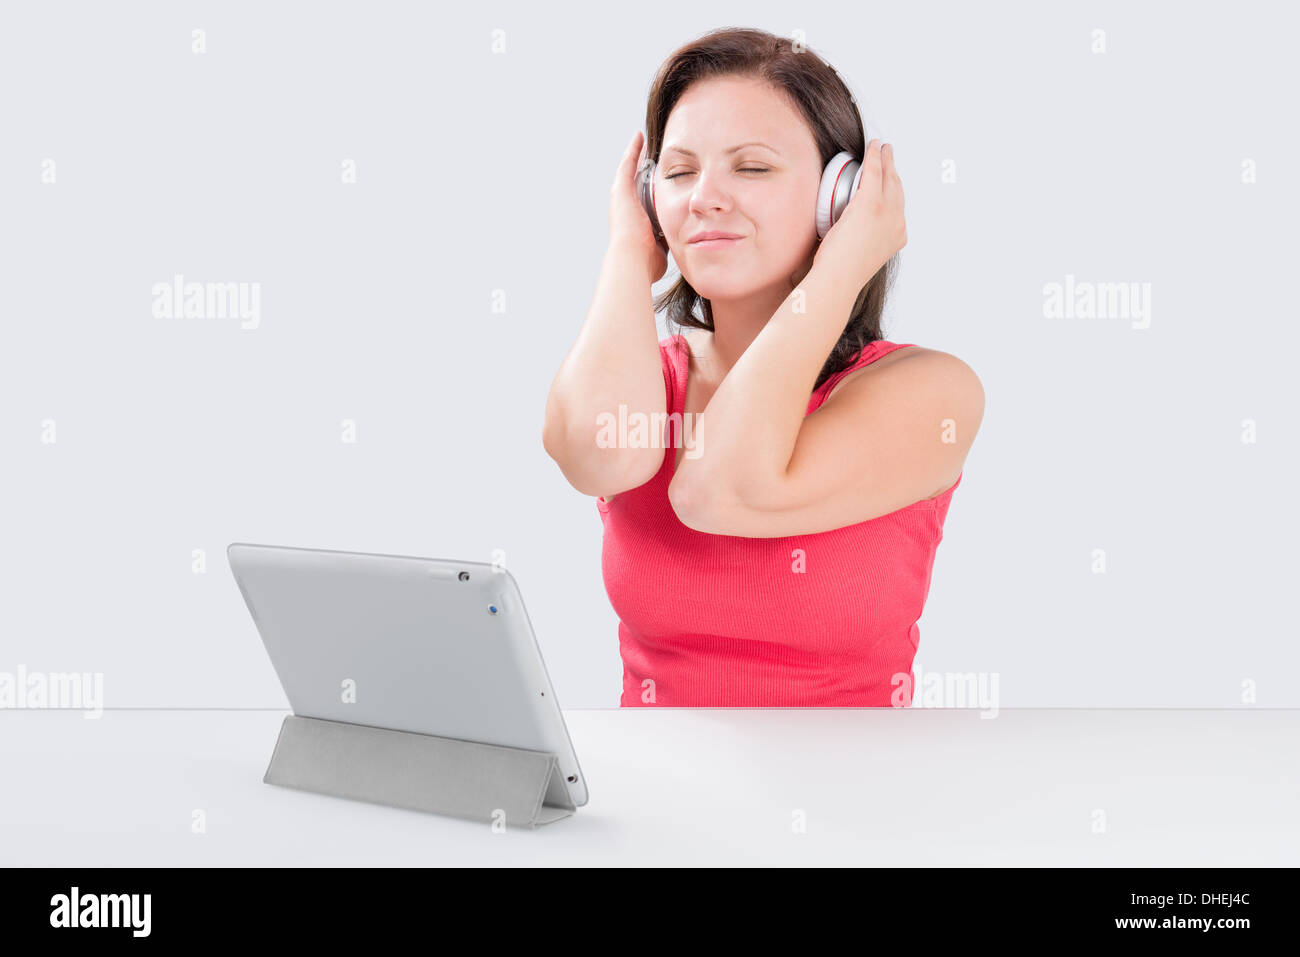 Young woman is listening to music through bluetooth headphones by digital tablet and dreaming Stock Photo